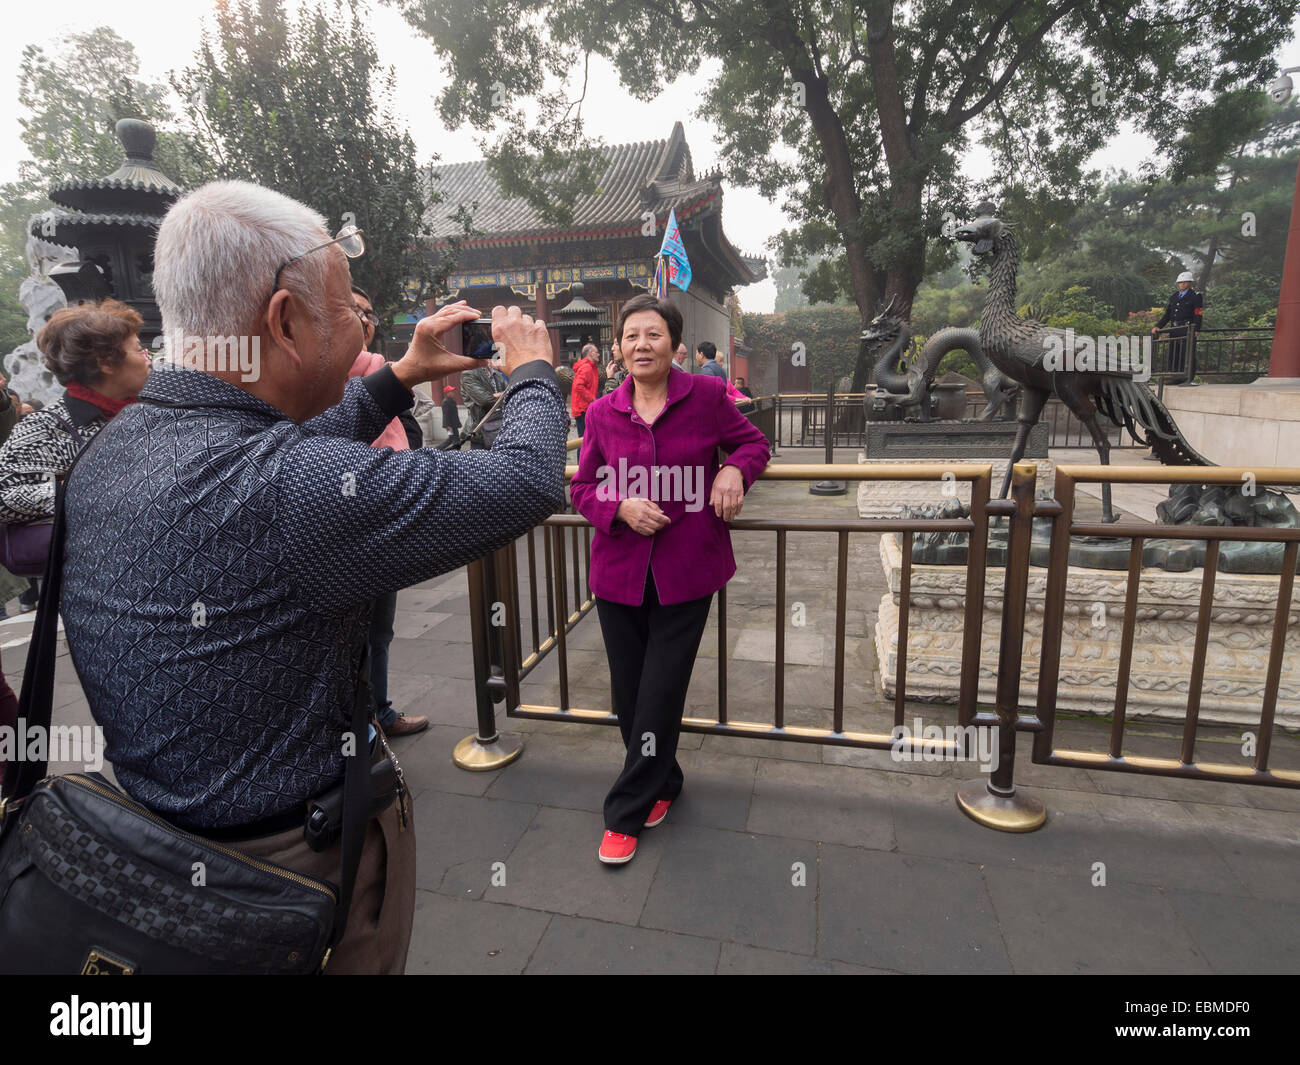 Chinese tourist taking photo of another tourist at The Summer Palace in Beijing, China, Asia Stock Photo